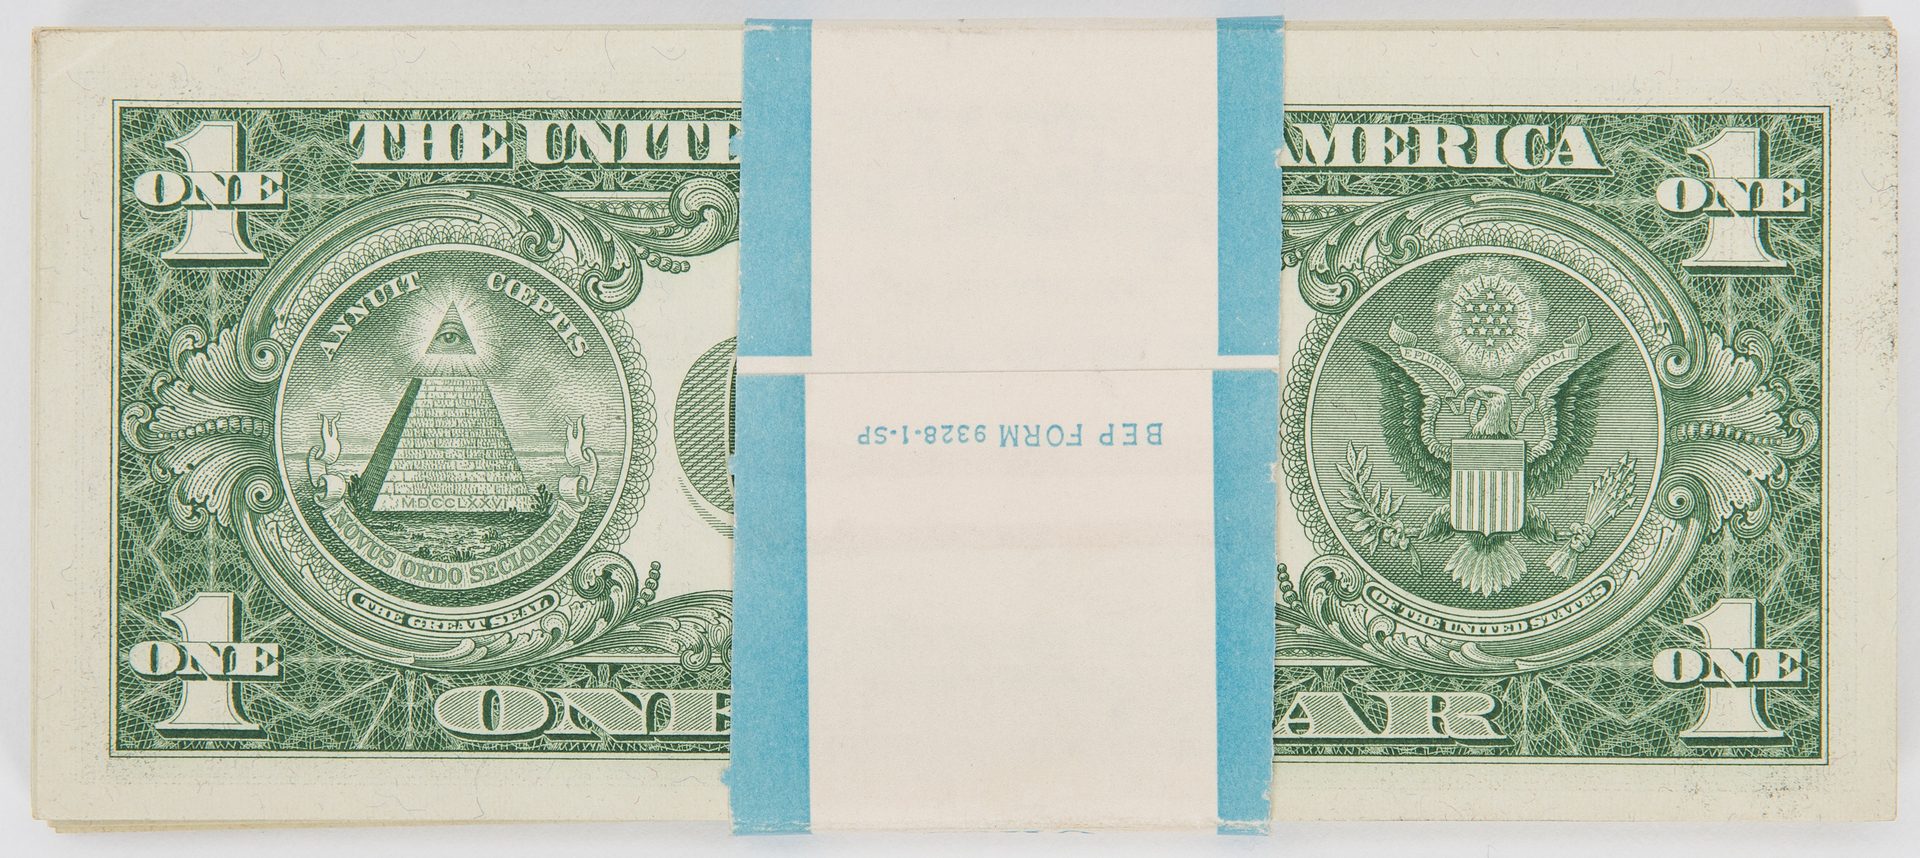 Lot 417: Pack of 100 1957 Silver Certificates